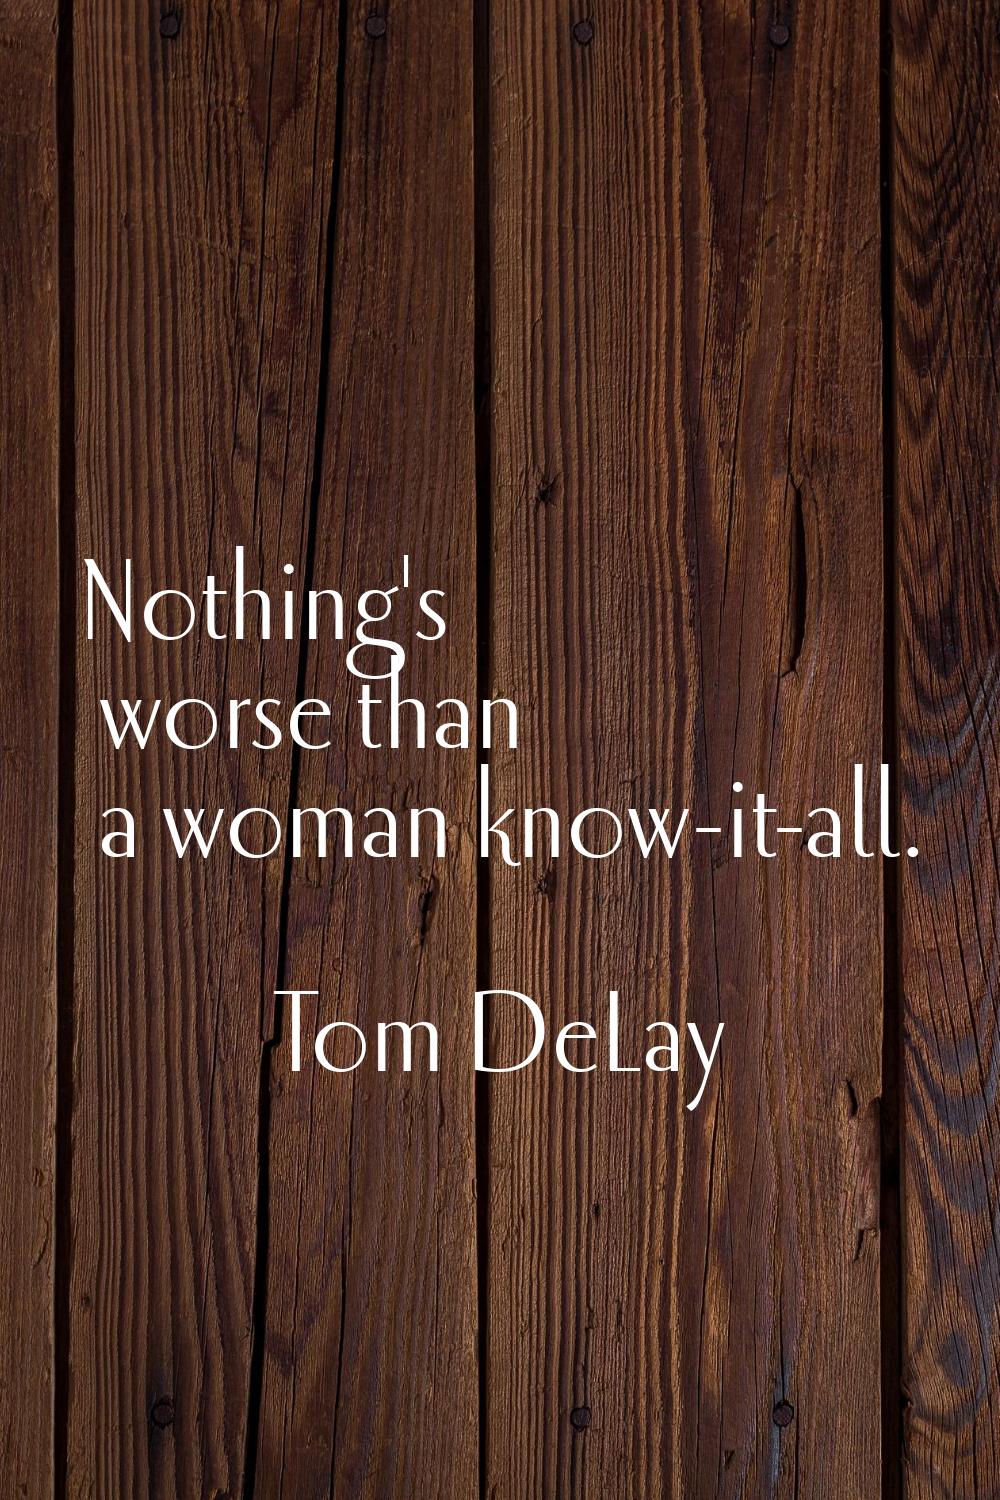 Nothing's worse than a woman know-it-all.